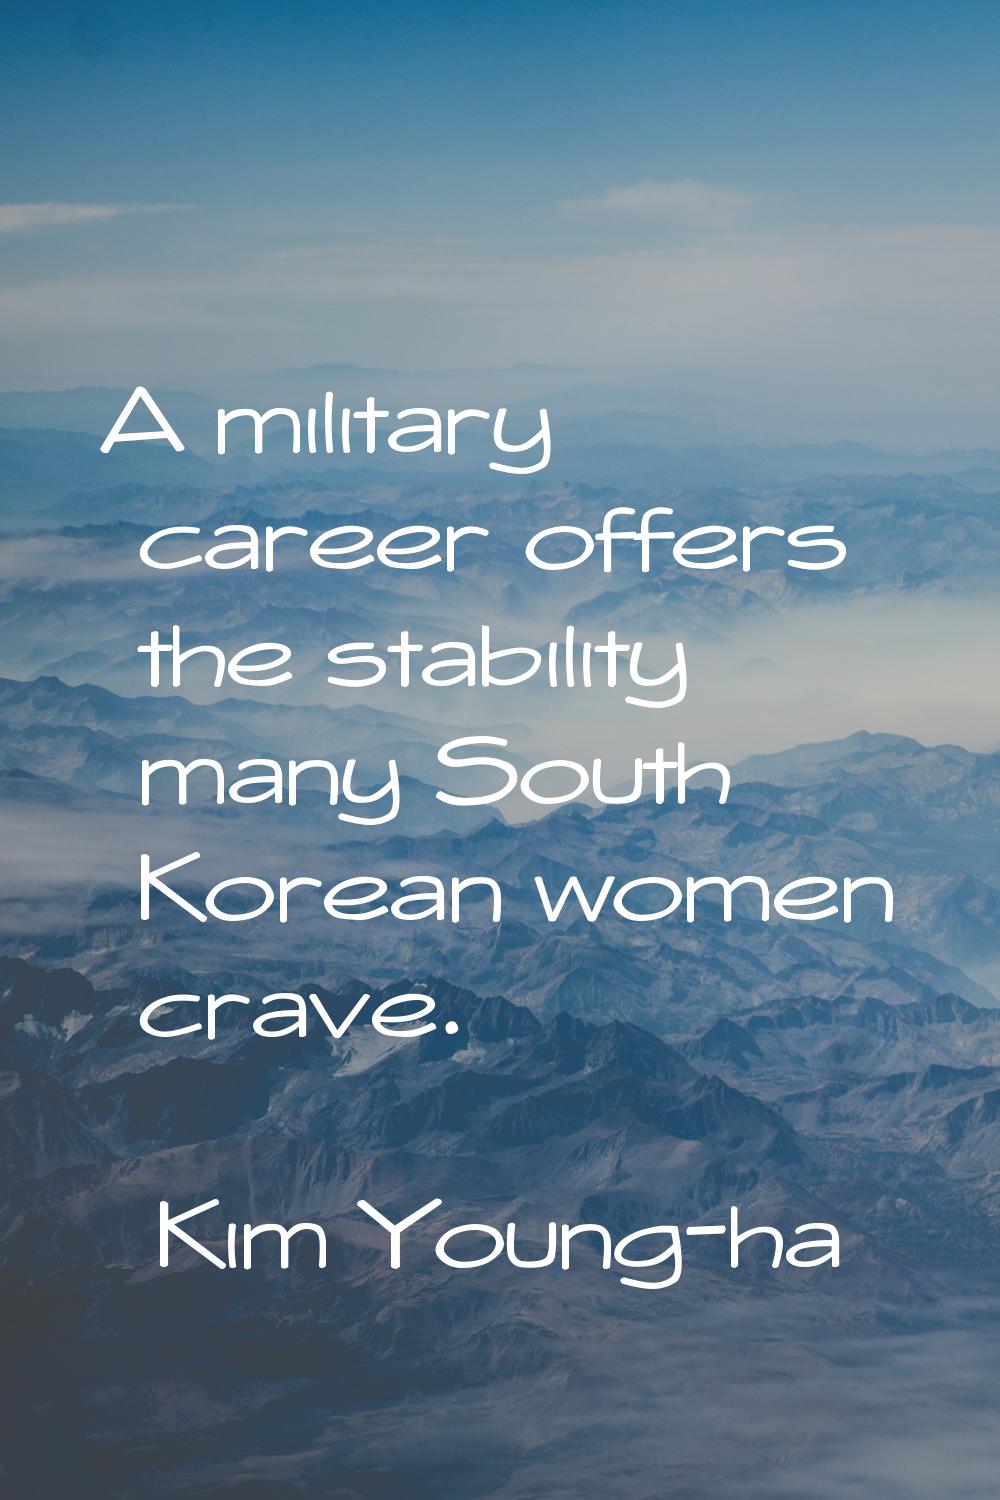 A military career offers the stability many South Korean women crave.